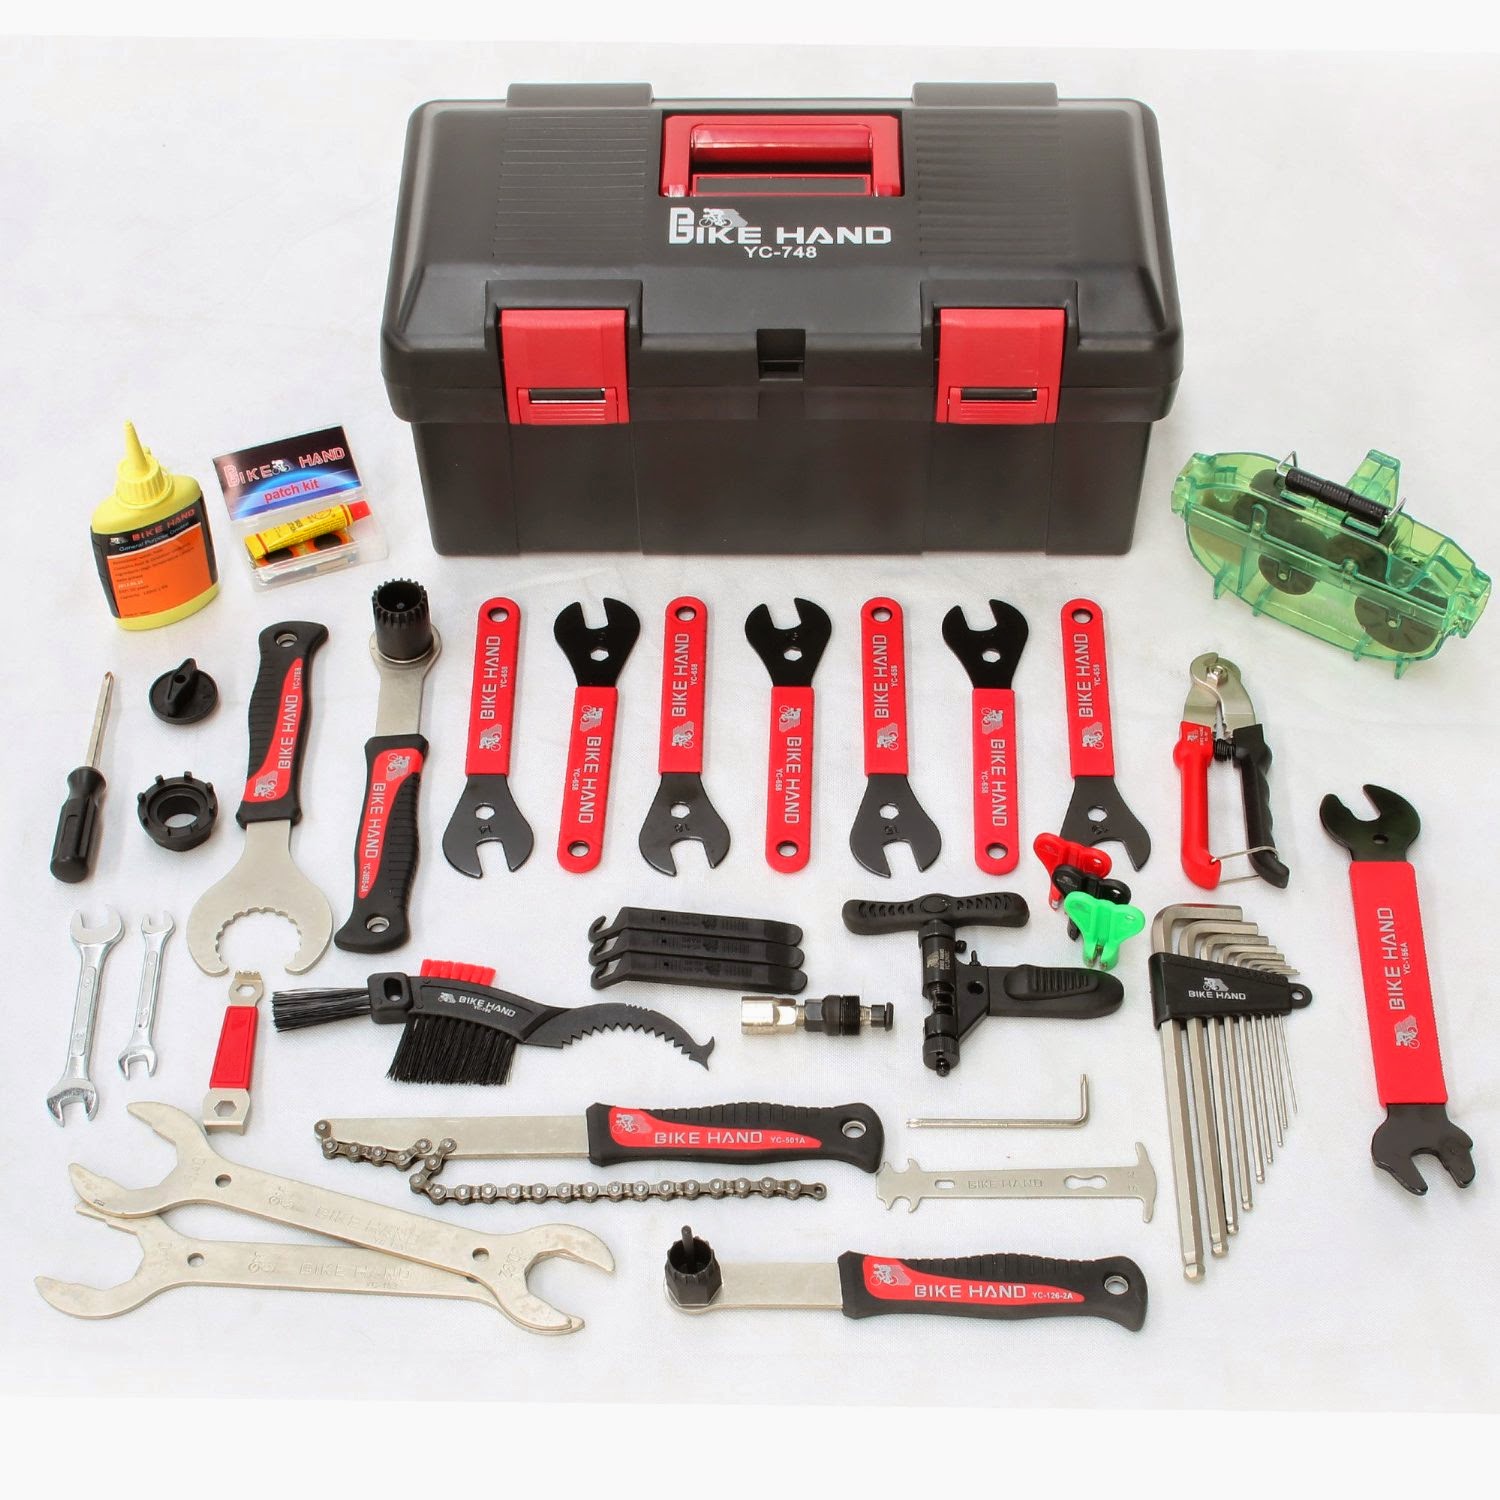 Bike Bicycle Repairs Tool Kit, for cycling safety checklist